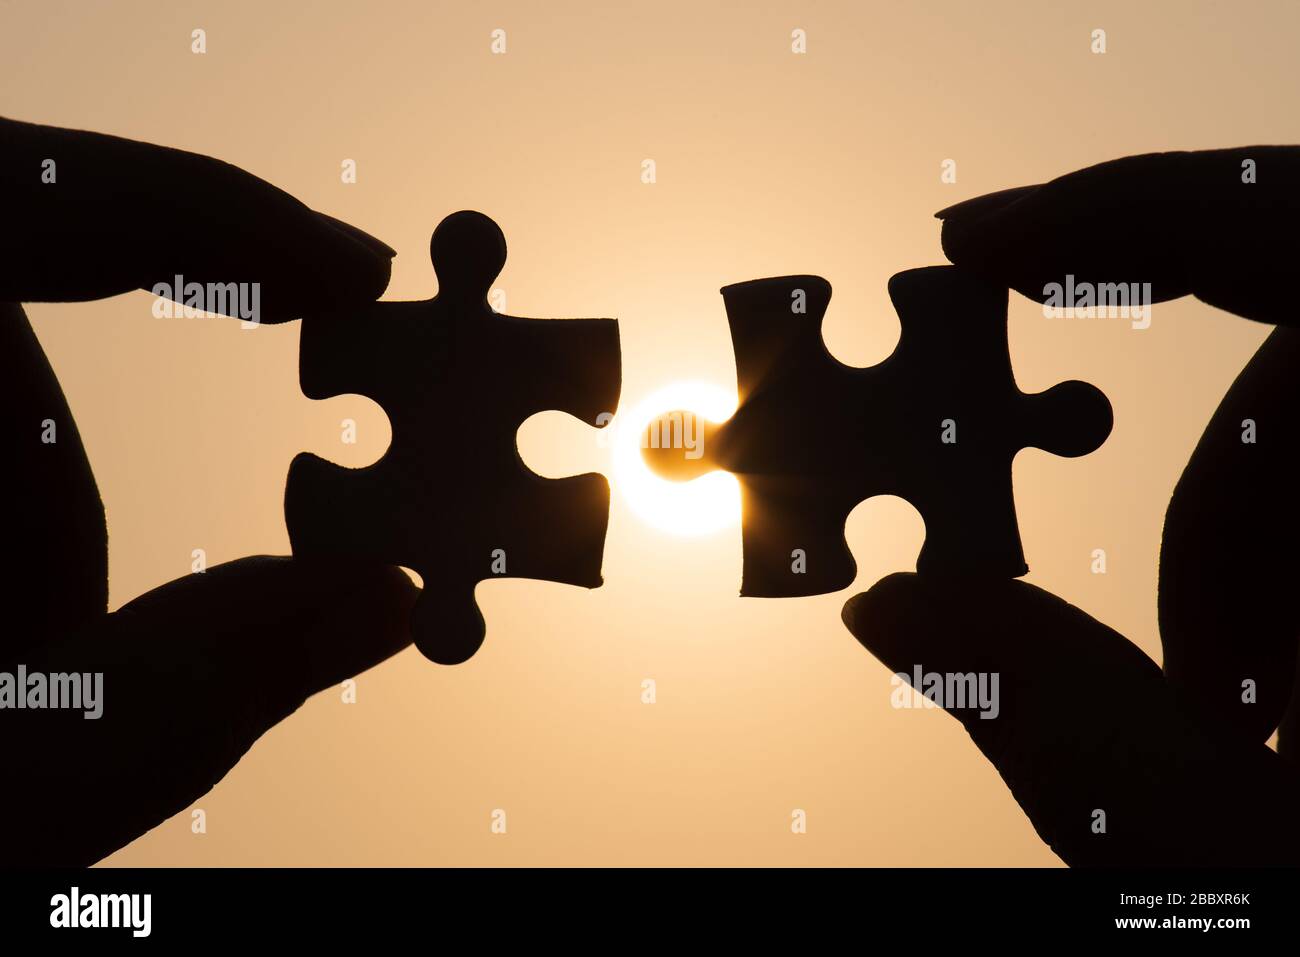 Silhouette of closeup woman's hand connecting a piece of jigsaw puzzle over sunlight effect. symbol of association and connection concept. business st Stock Photo